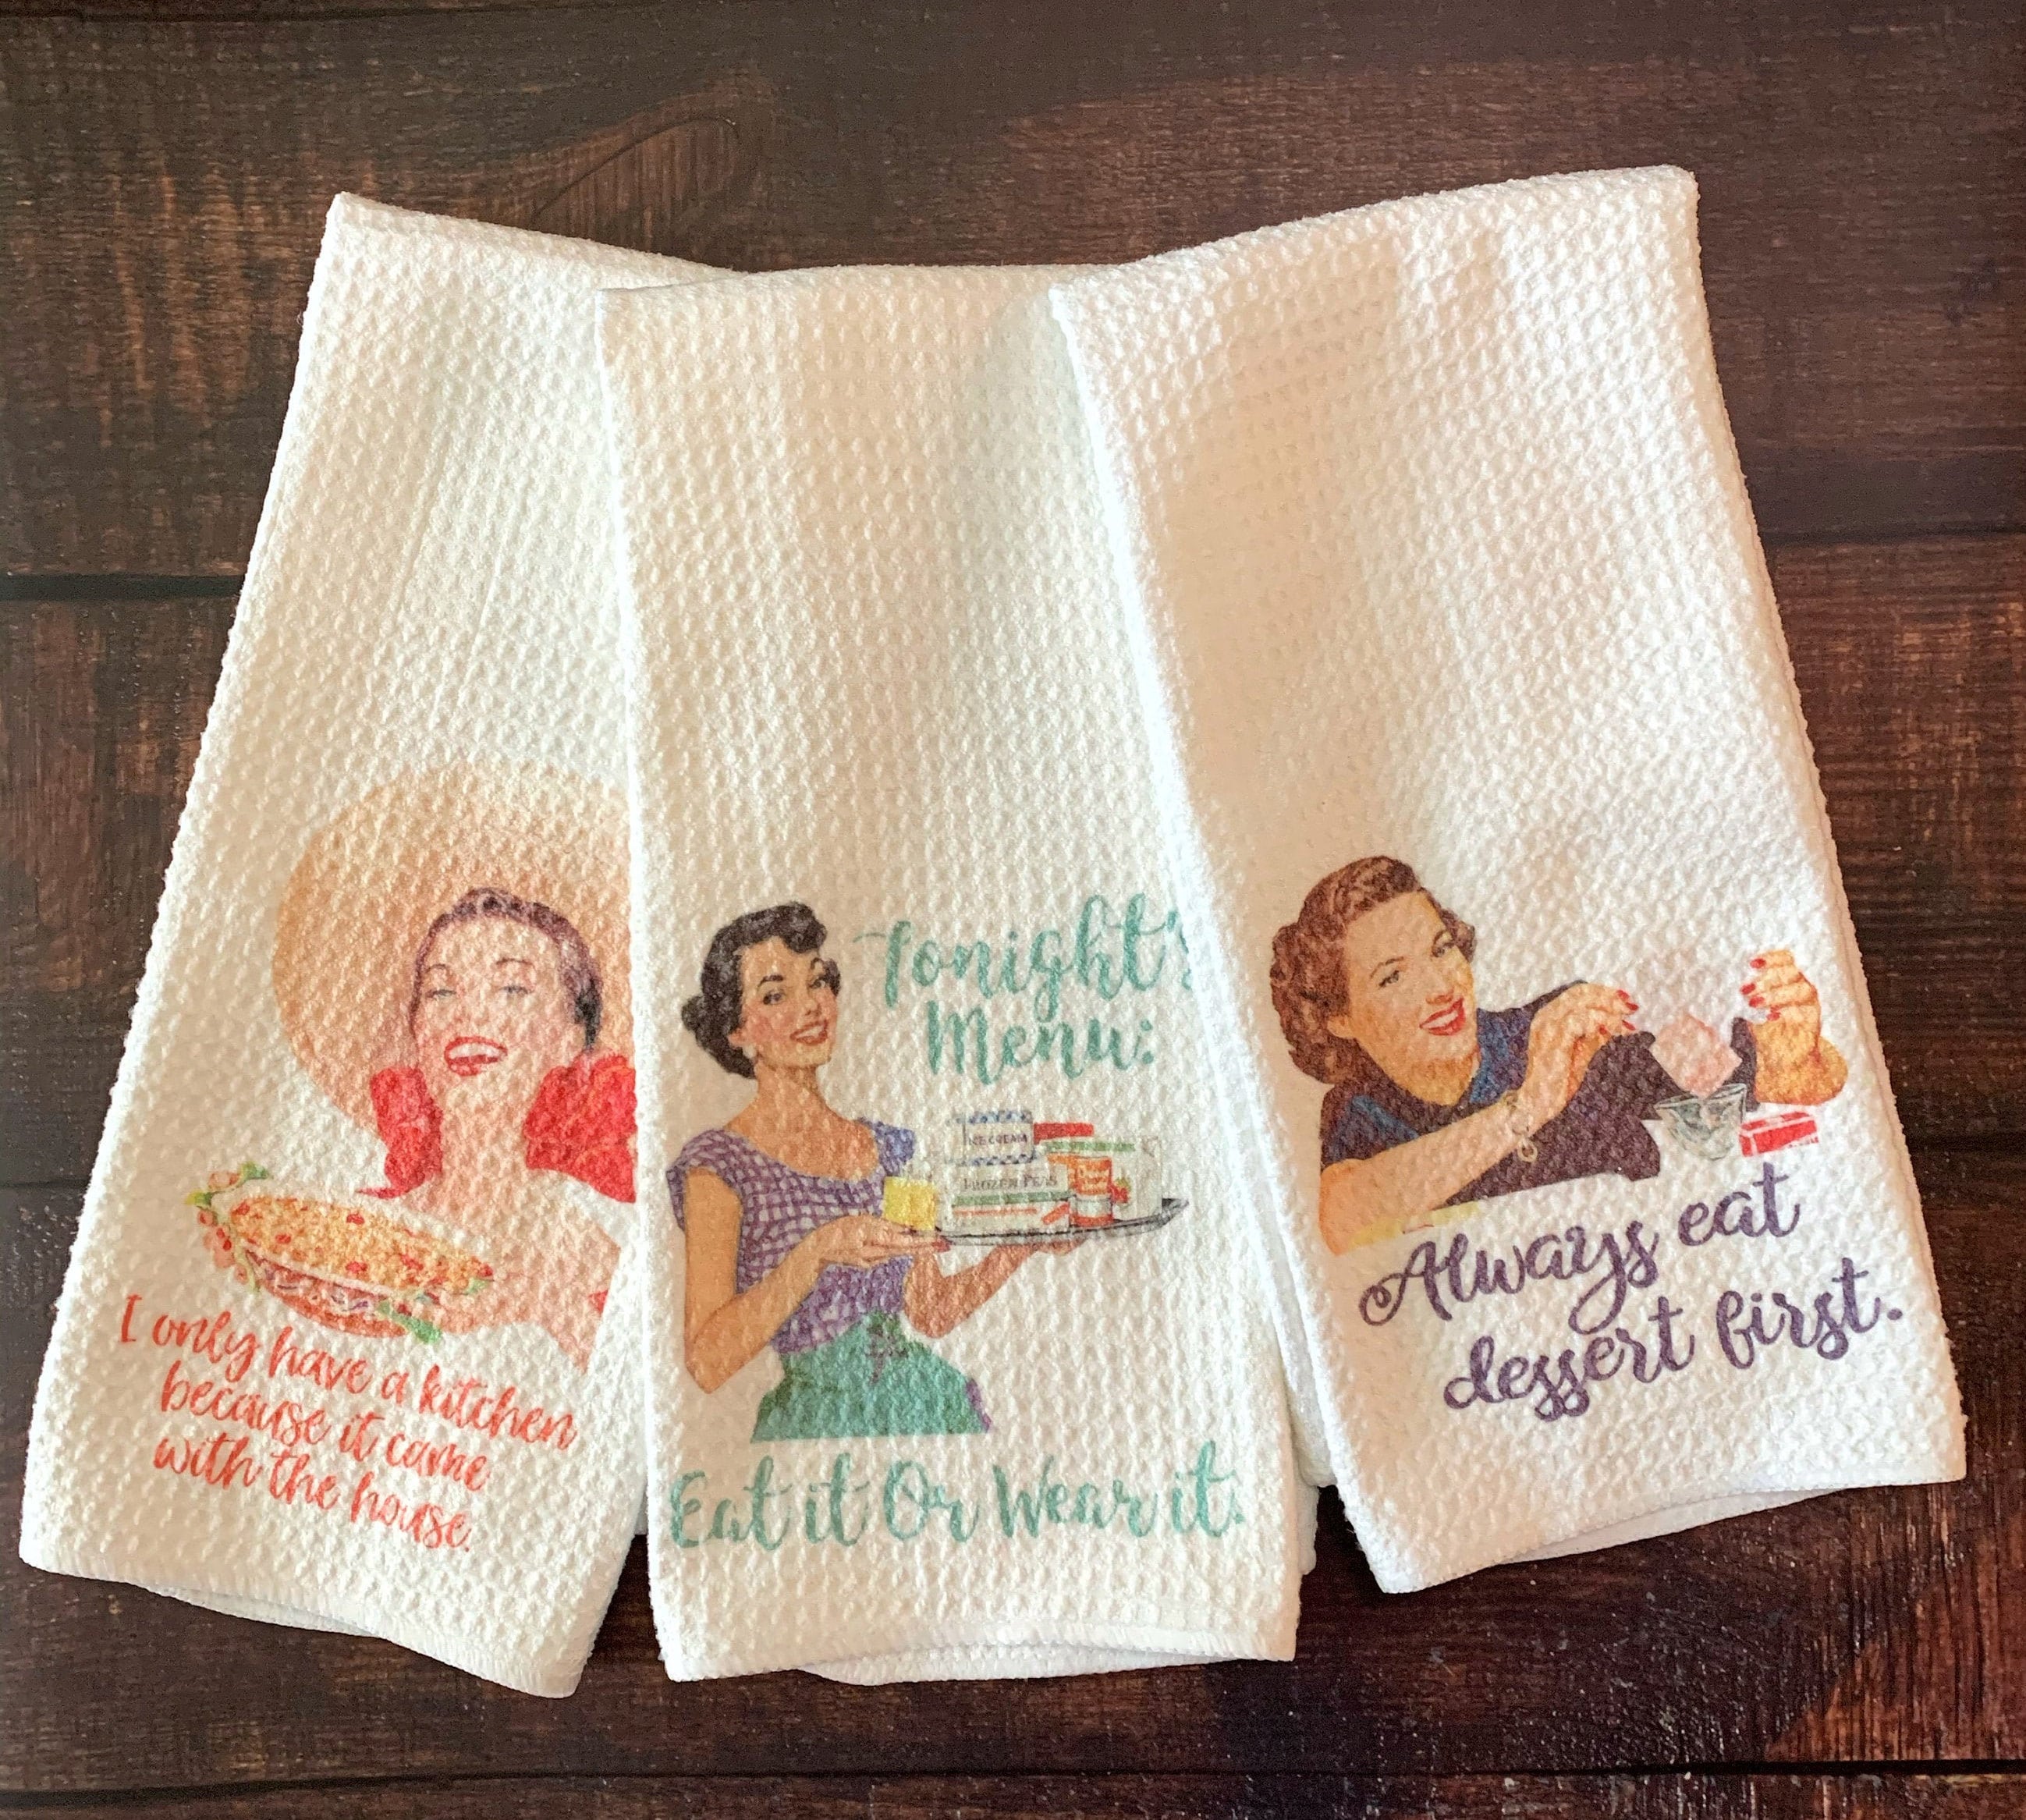 Funny Retro Housewife Towel, Funny Kitchen Towel, Sarcastic Kitchen Towel,  Housewarming Friendship Gift, Dish Towel, Free Personalization 